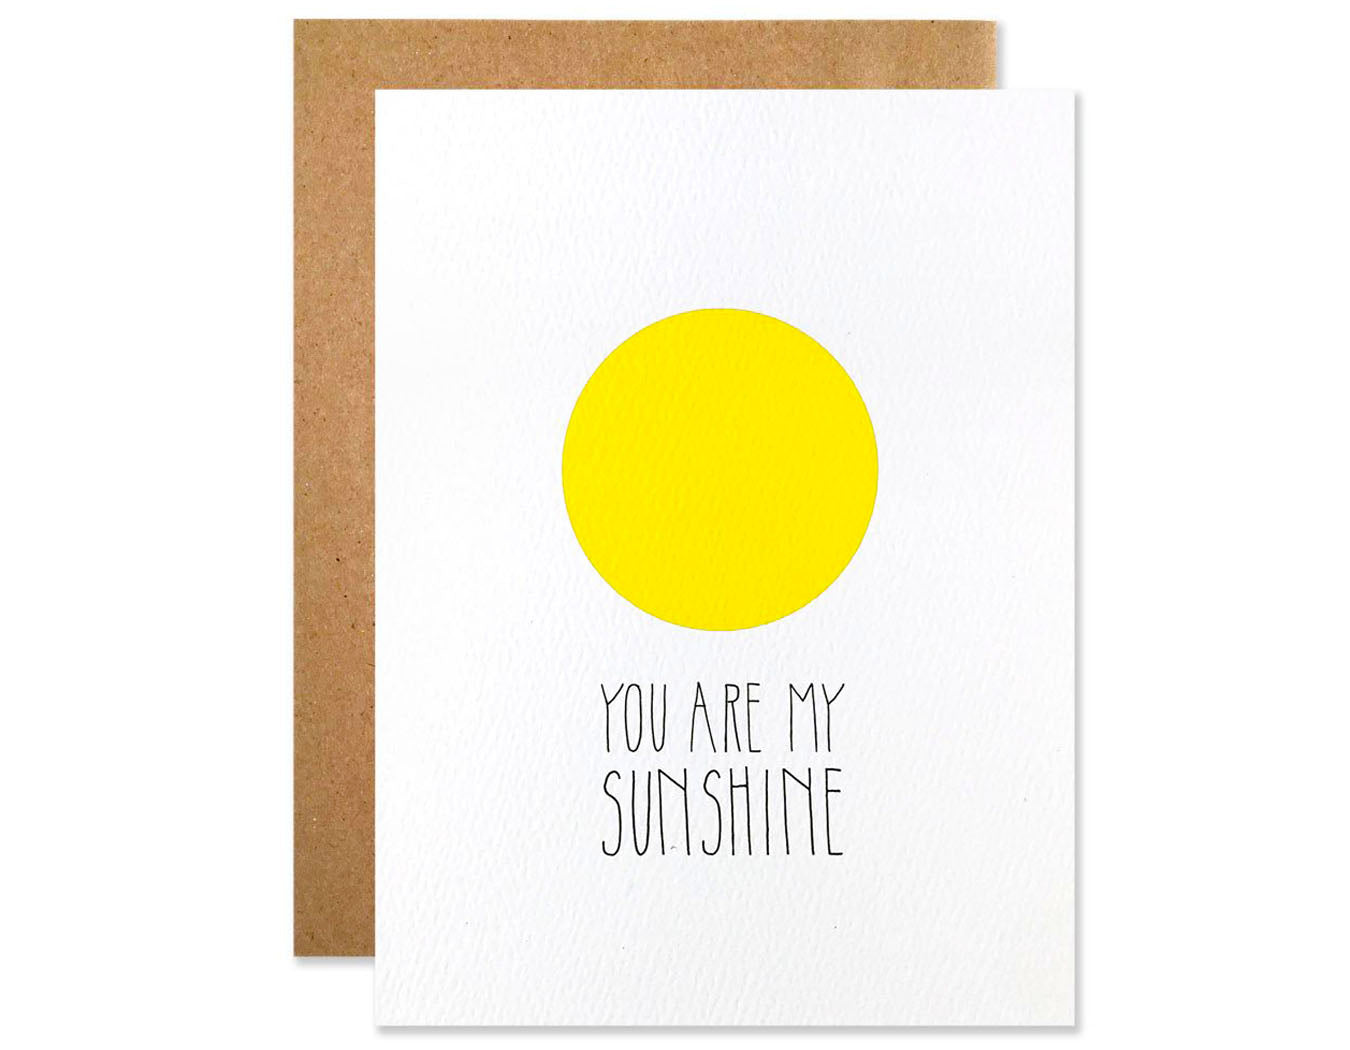 neon yellow circle text reads you are my sunshine